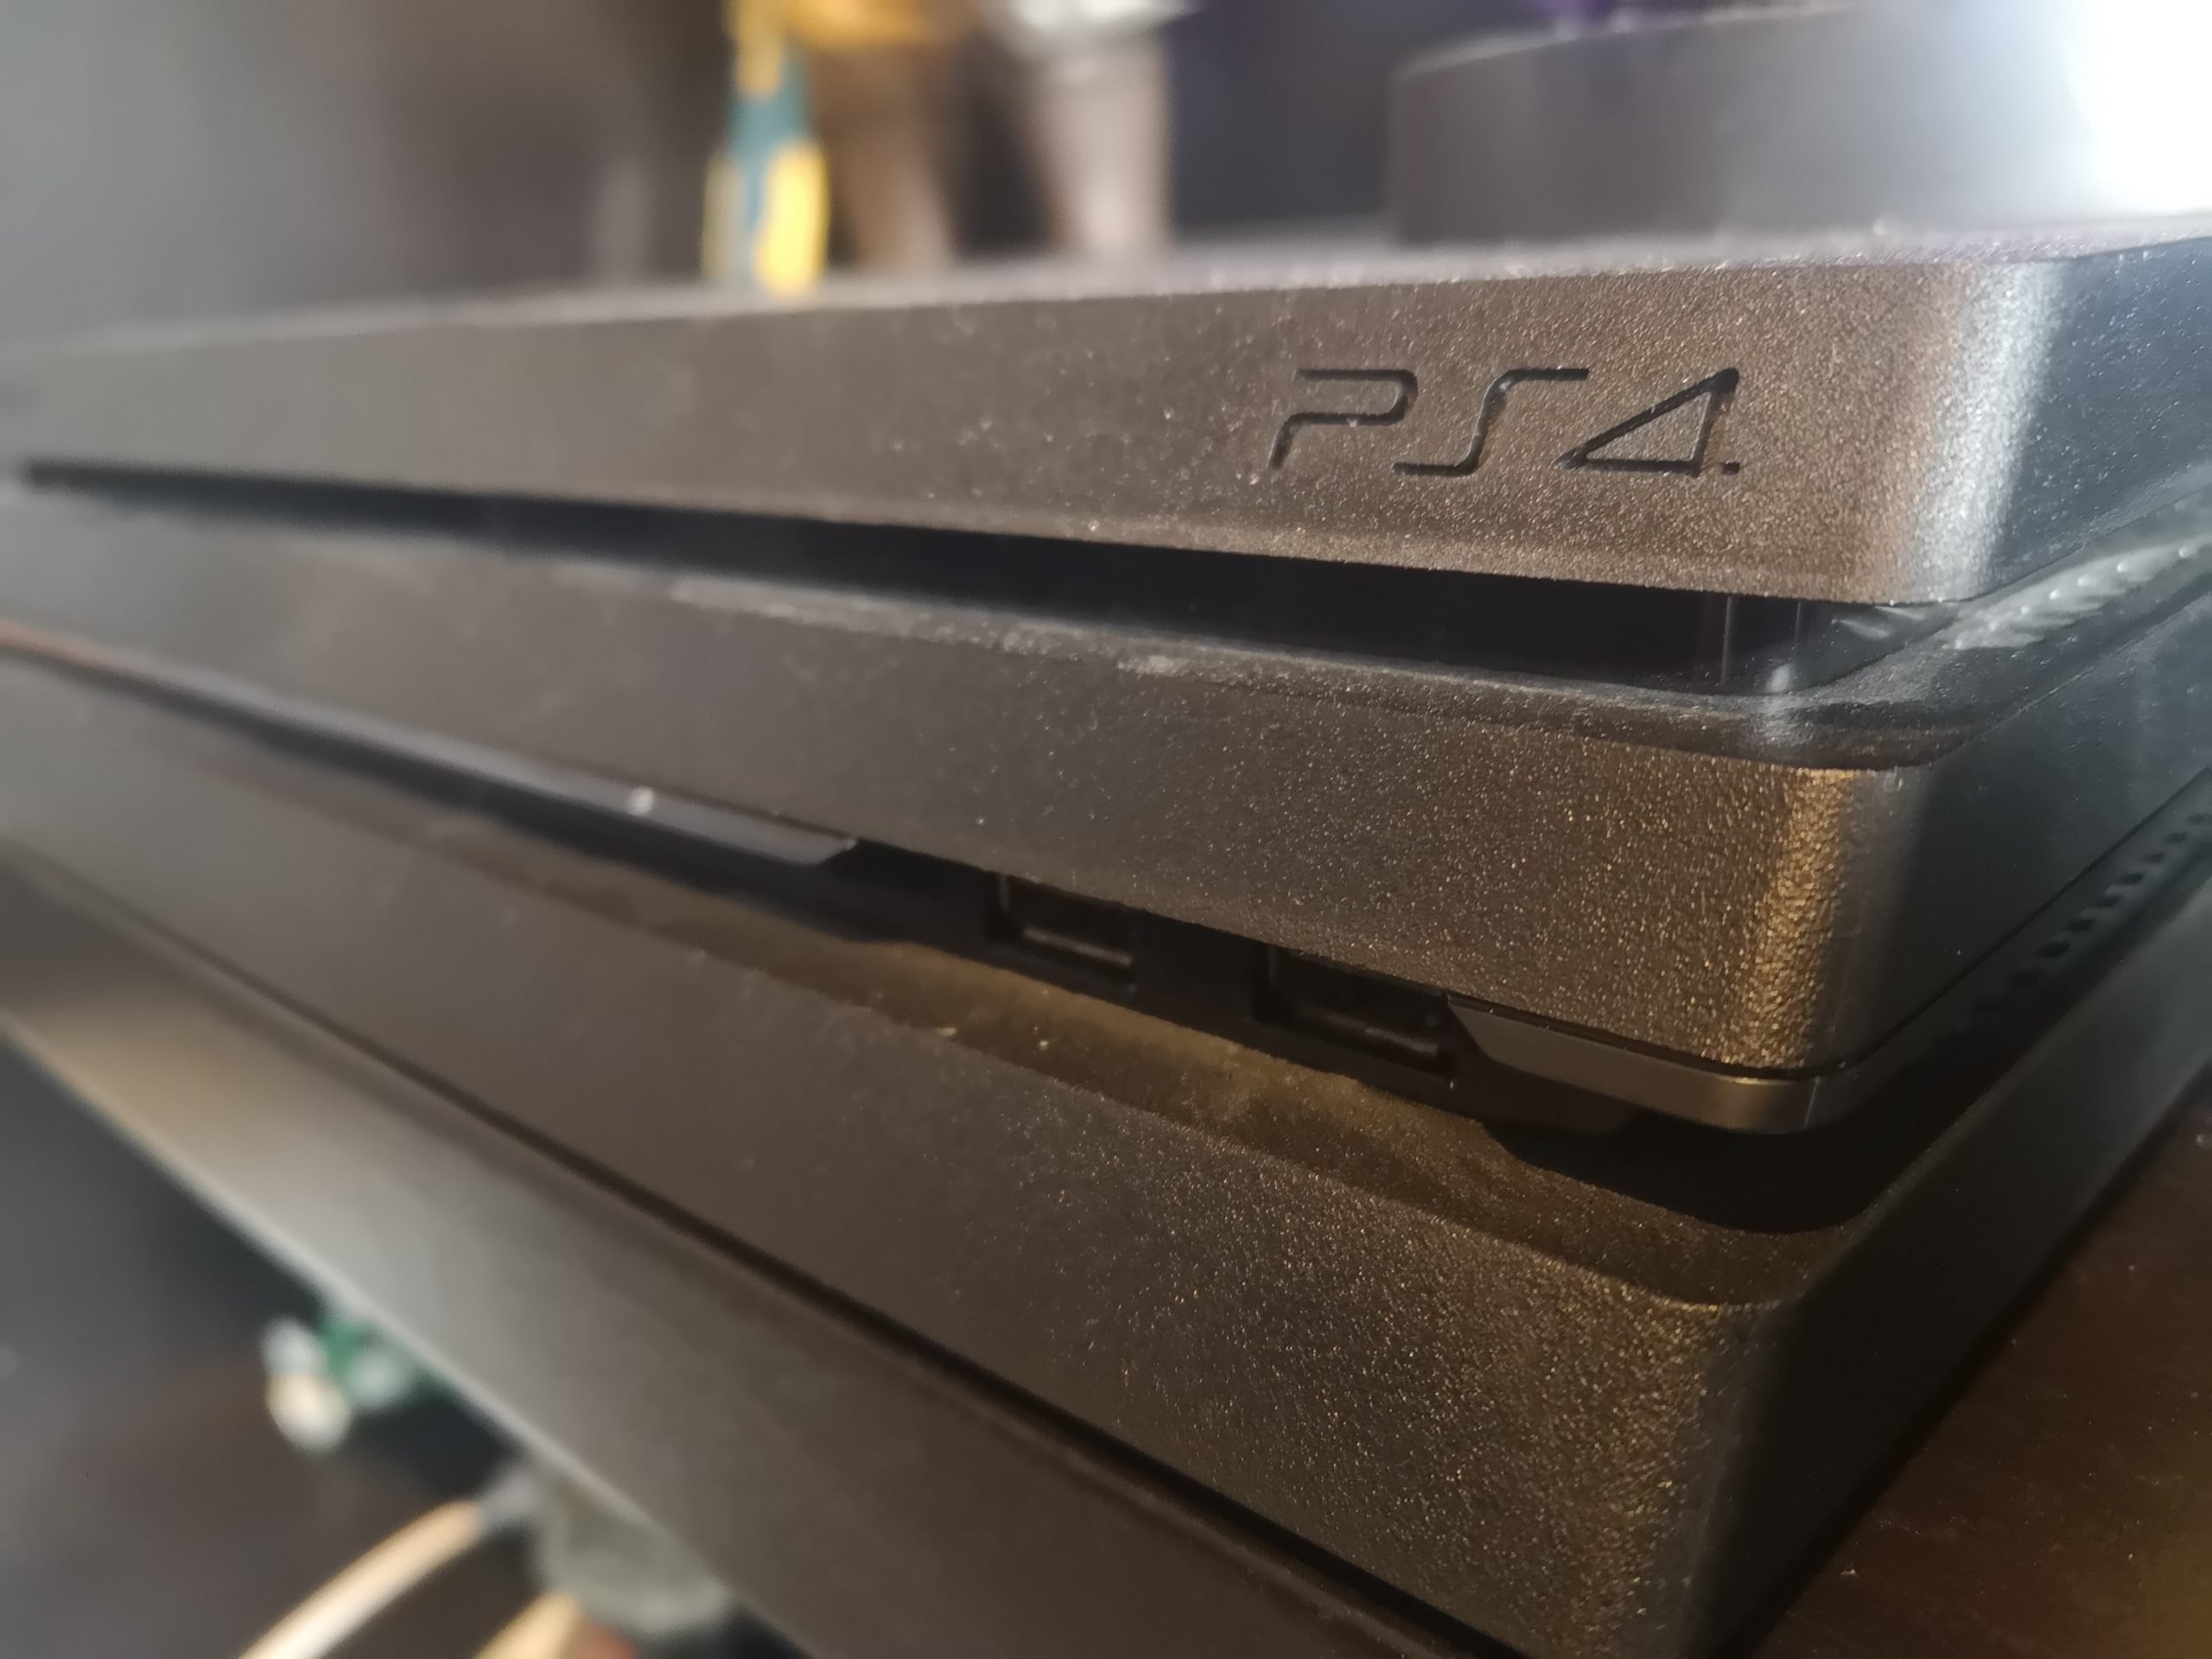 marts Prevail nul Solved] [Fixed] PS4 Beeps Once And Turns Off - PlayStation 4